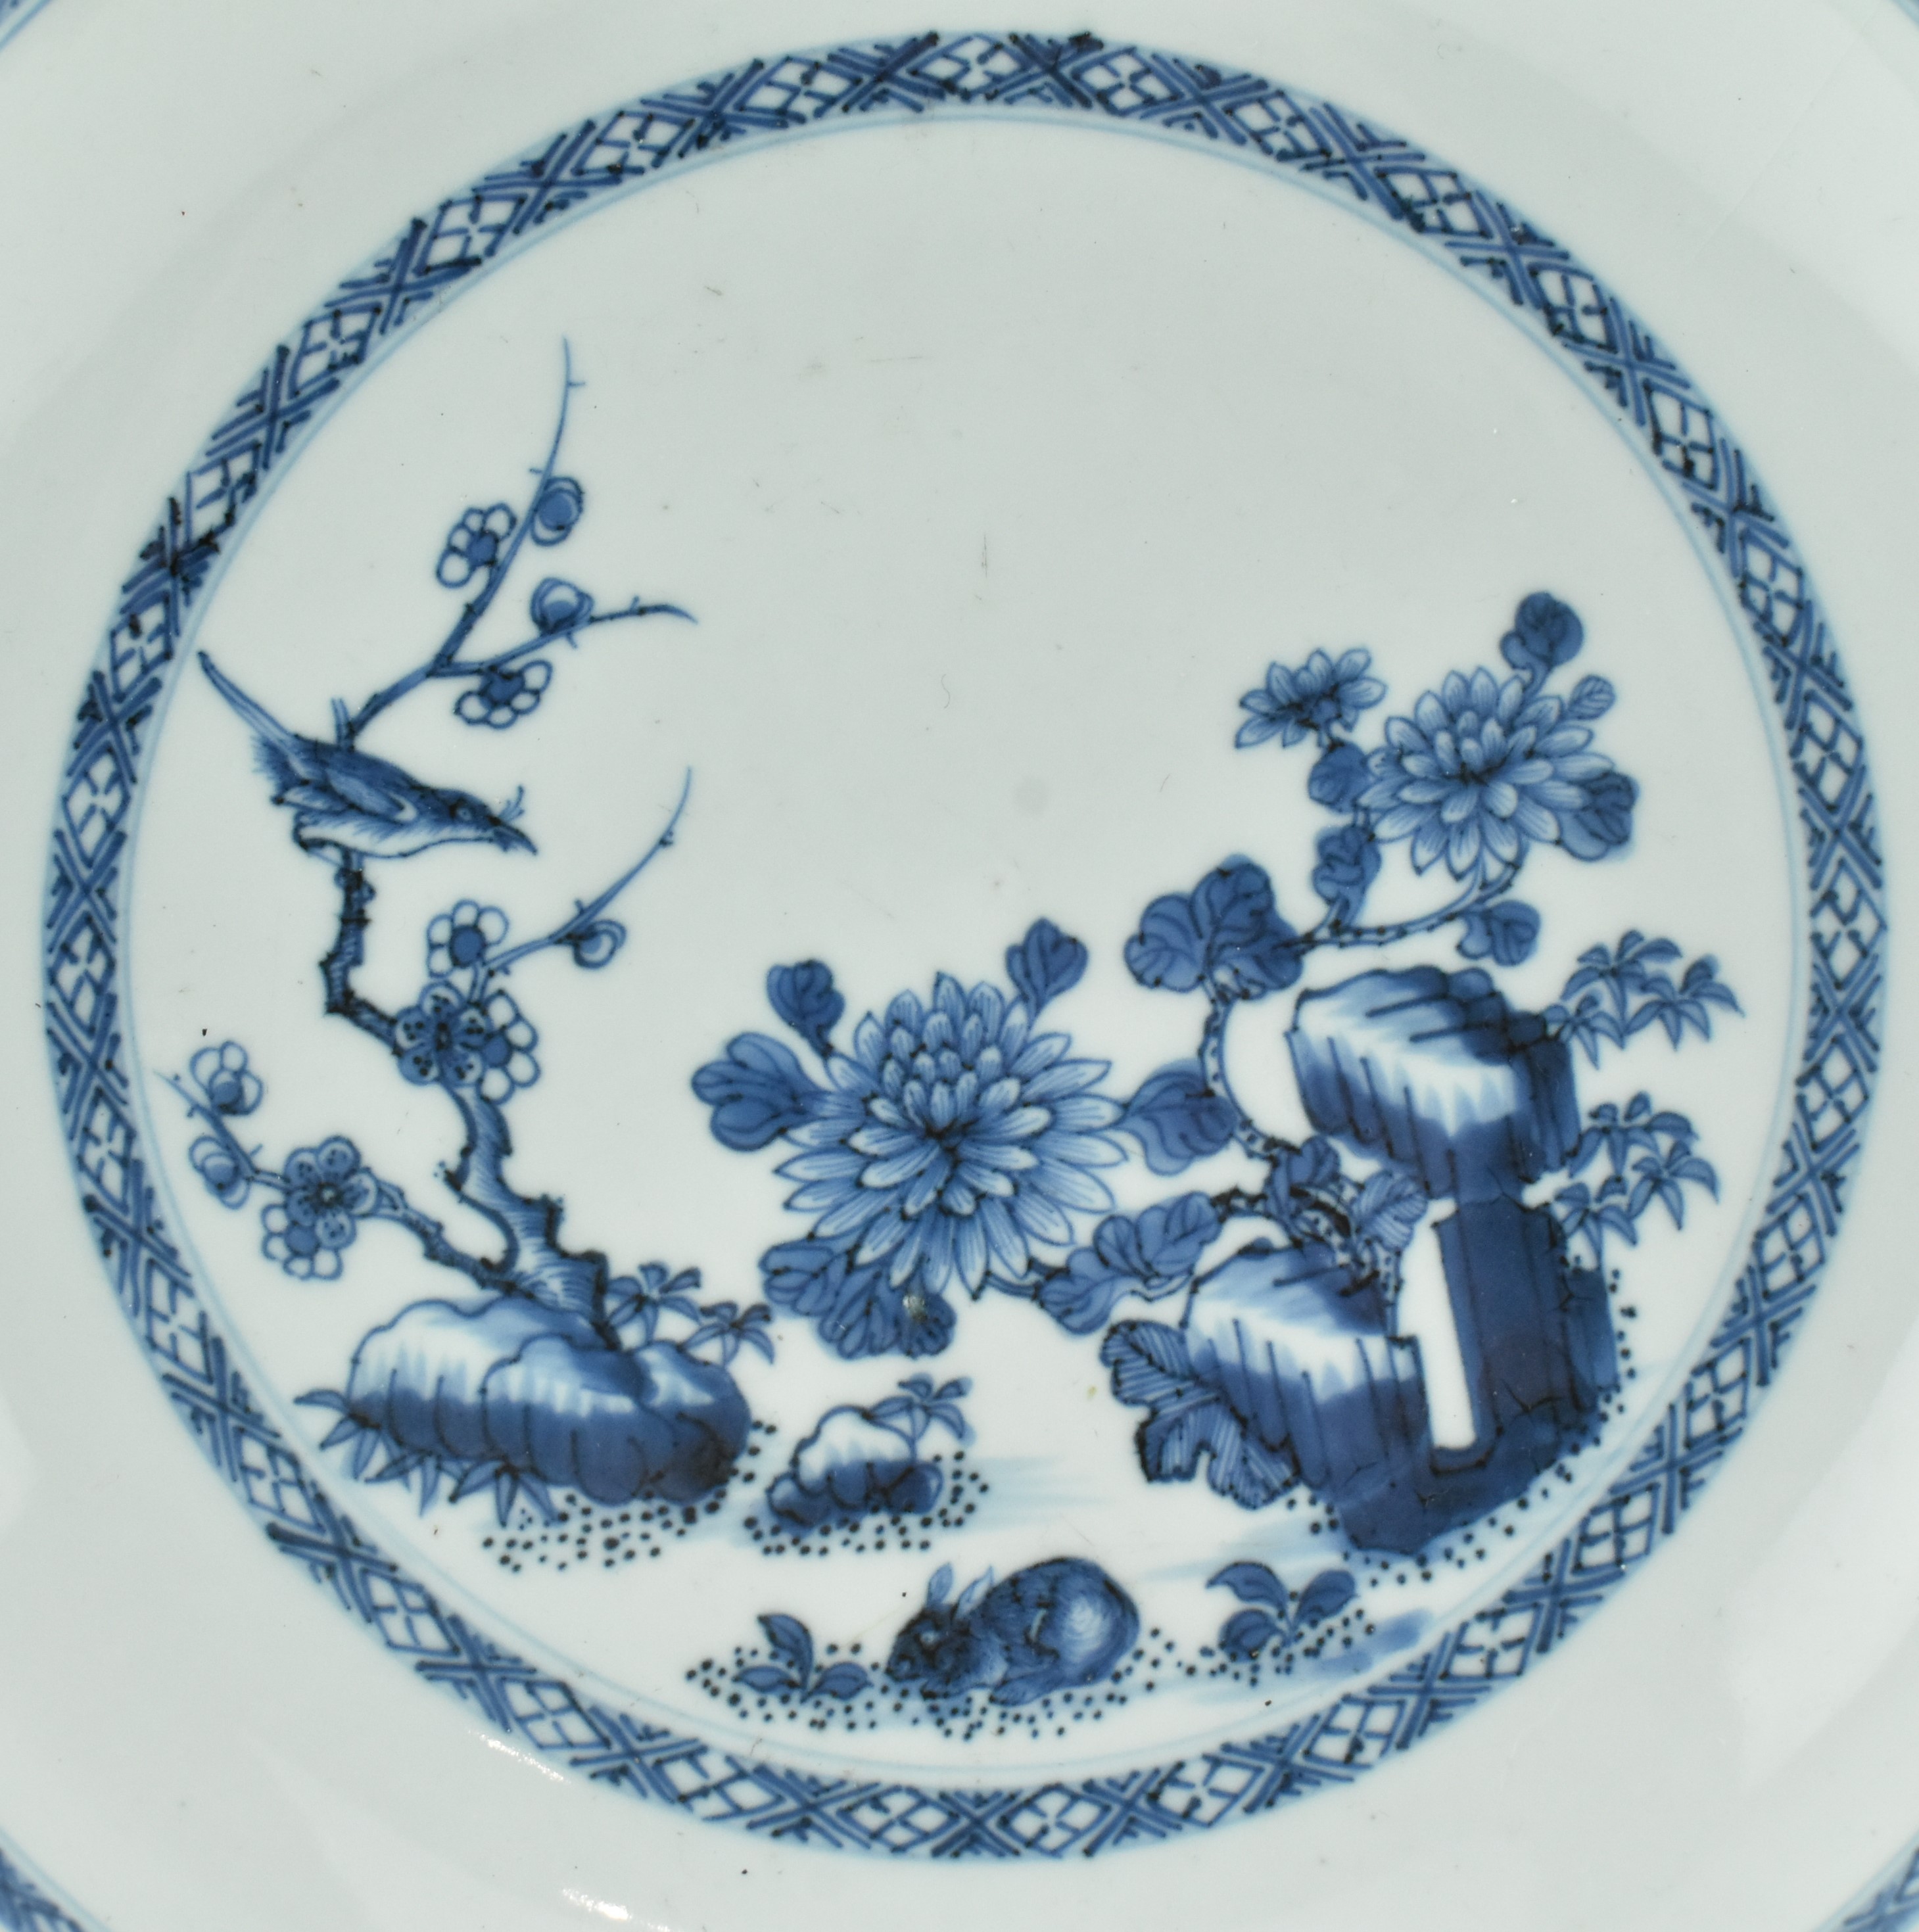 QING 18TH CENTURY BLUE AND WHITE CHARGER 清 康熙青花花鸟盘 - Image 5 of 5